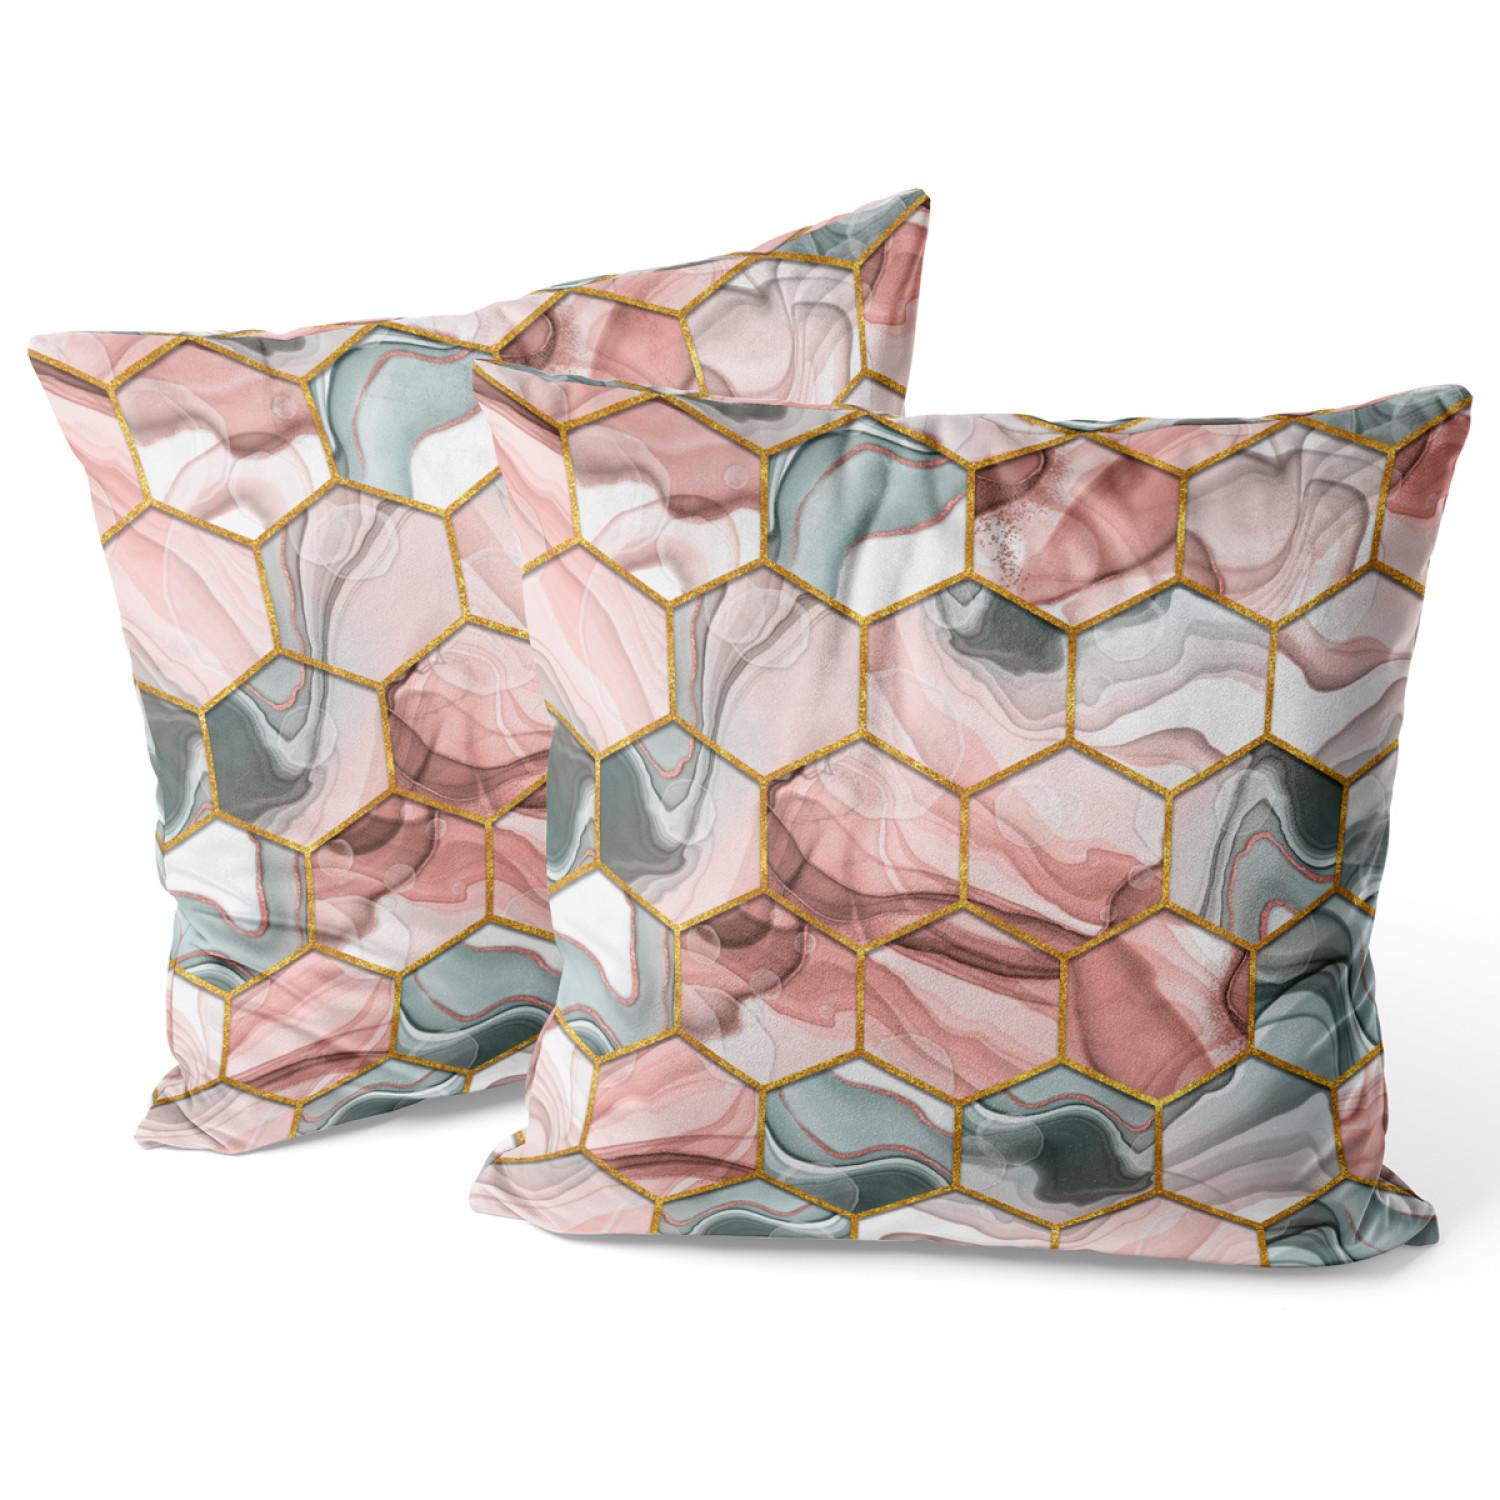 Decorative Velor Pillow Plant hexagons - motif in shades of gold, green and red